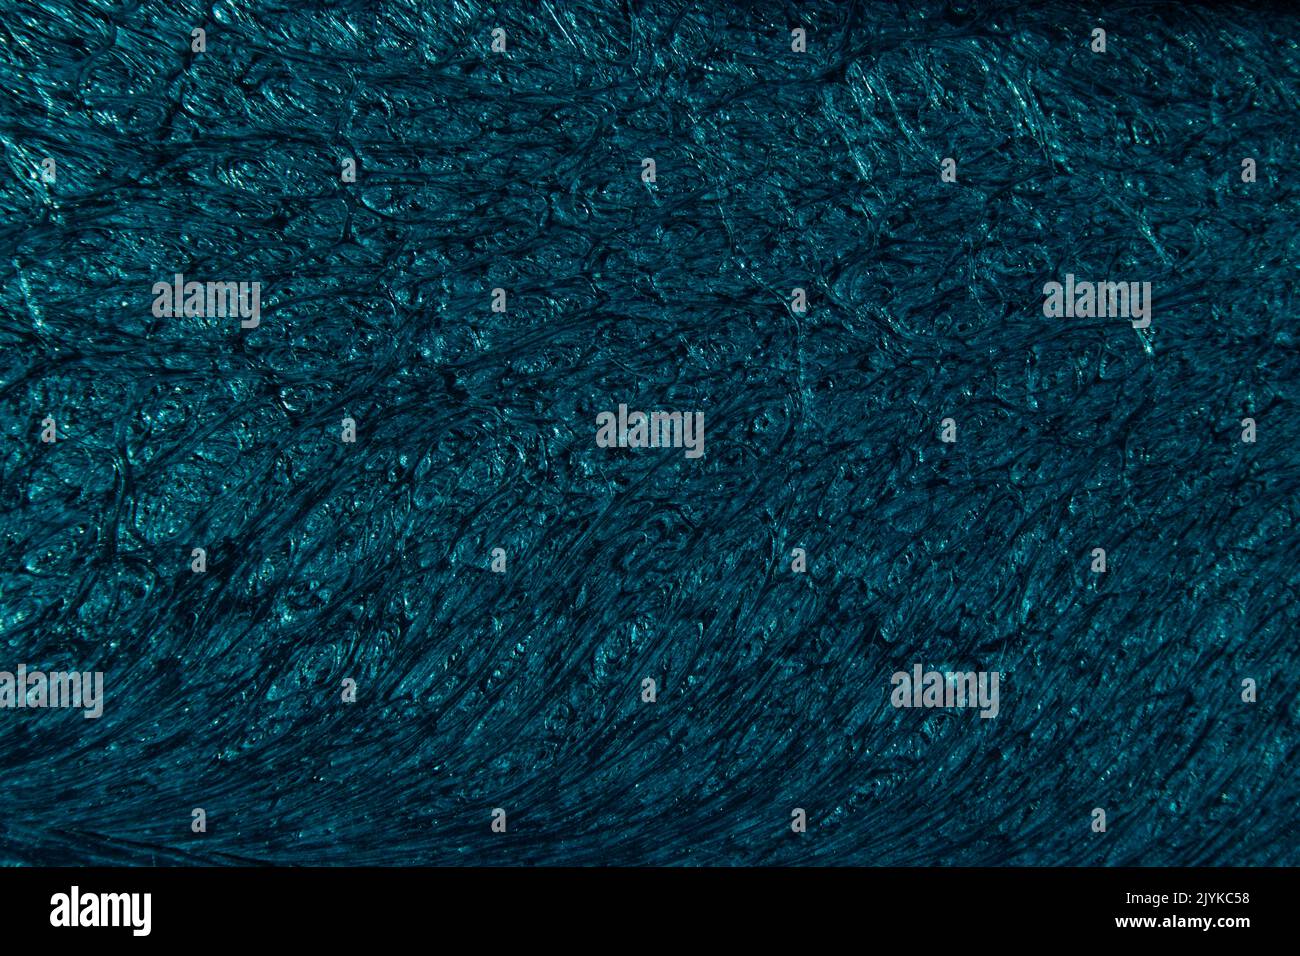 Petrol colored background with wavy textures of different shades of dark teal Stock Photo